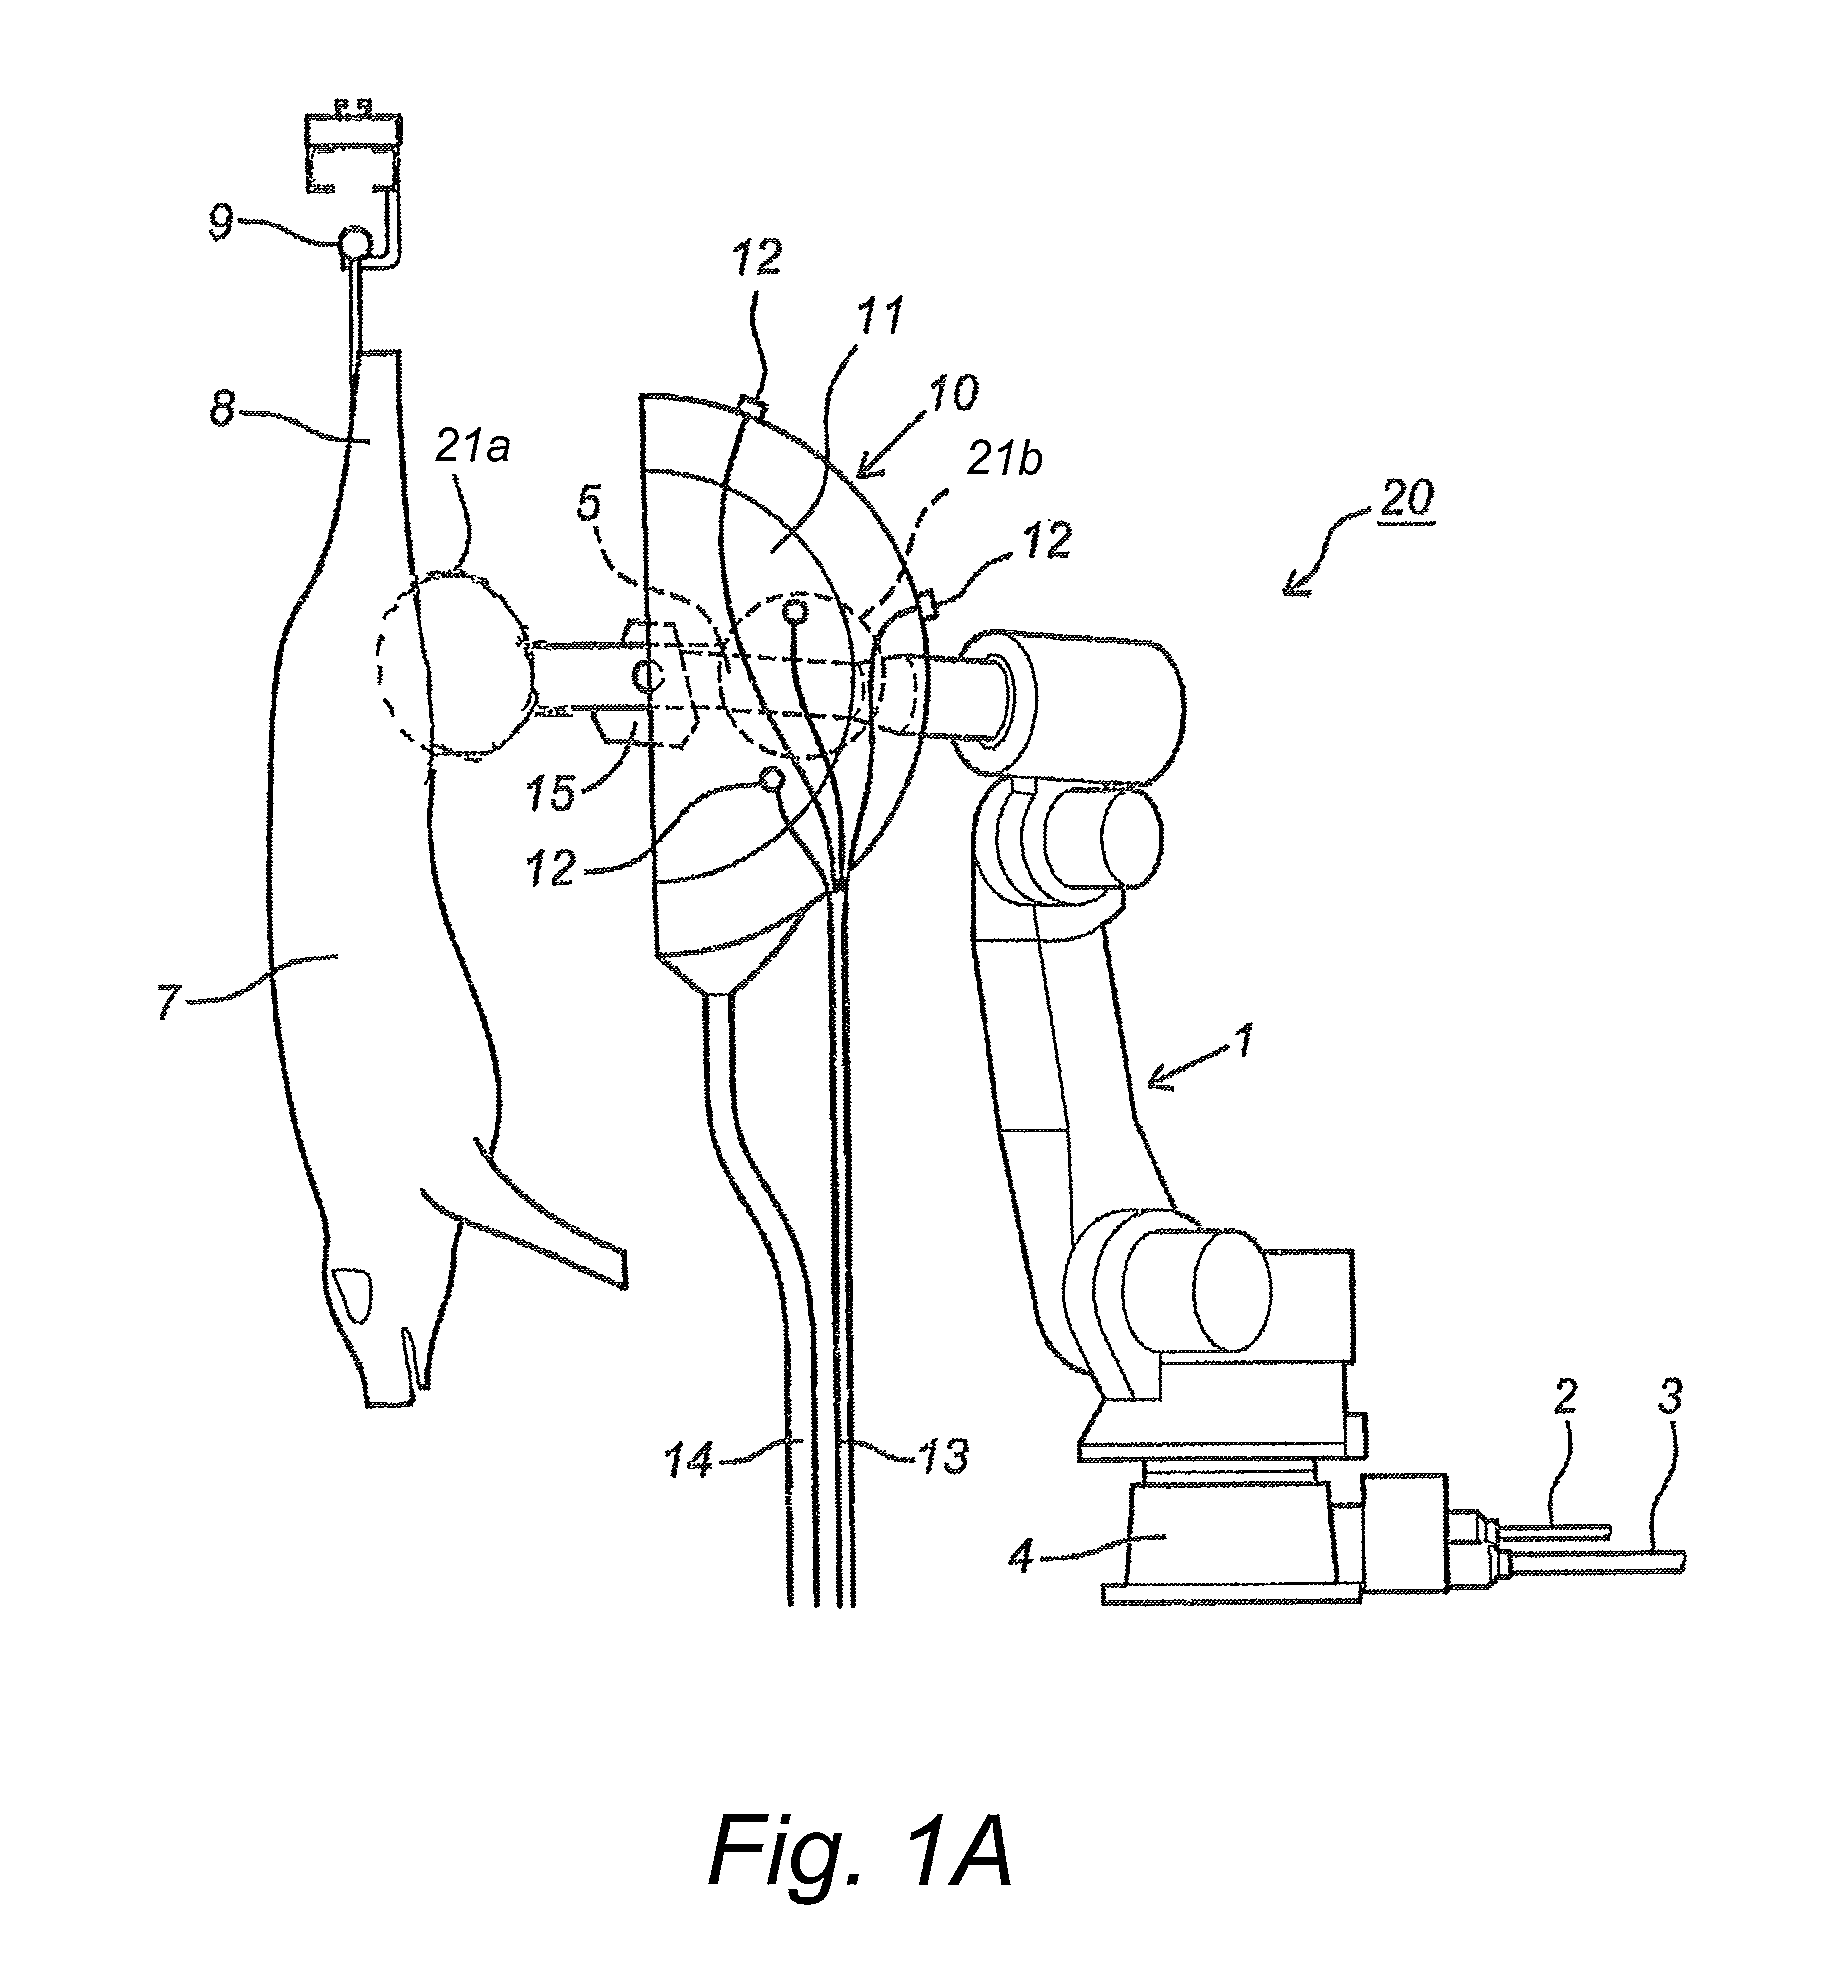 Device and method for processing carcasses of livestock